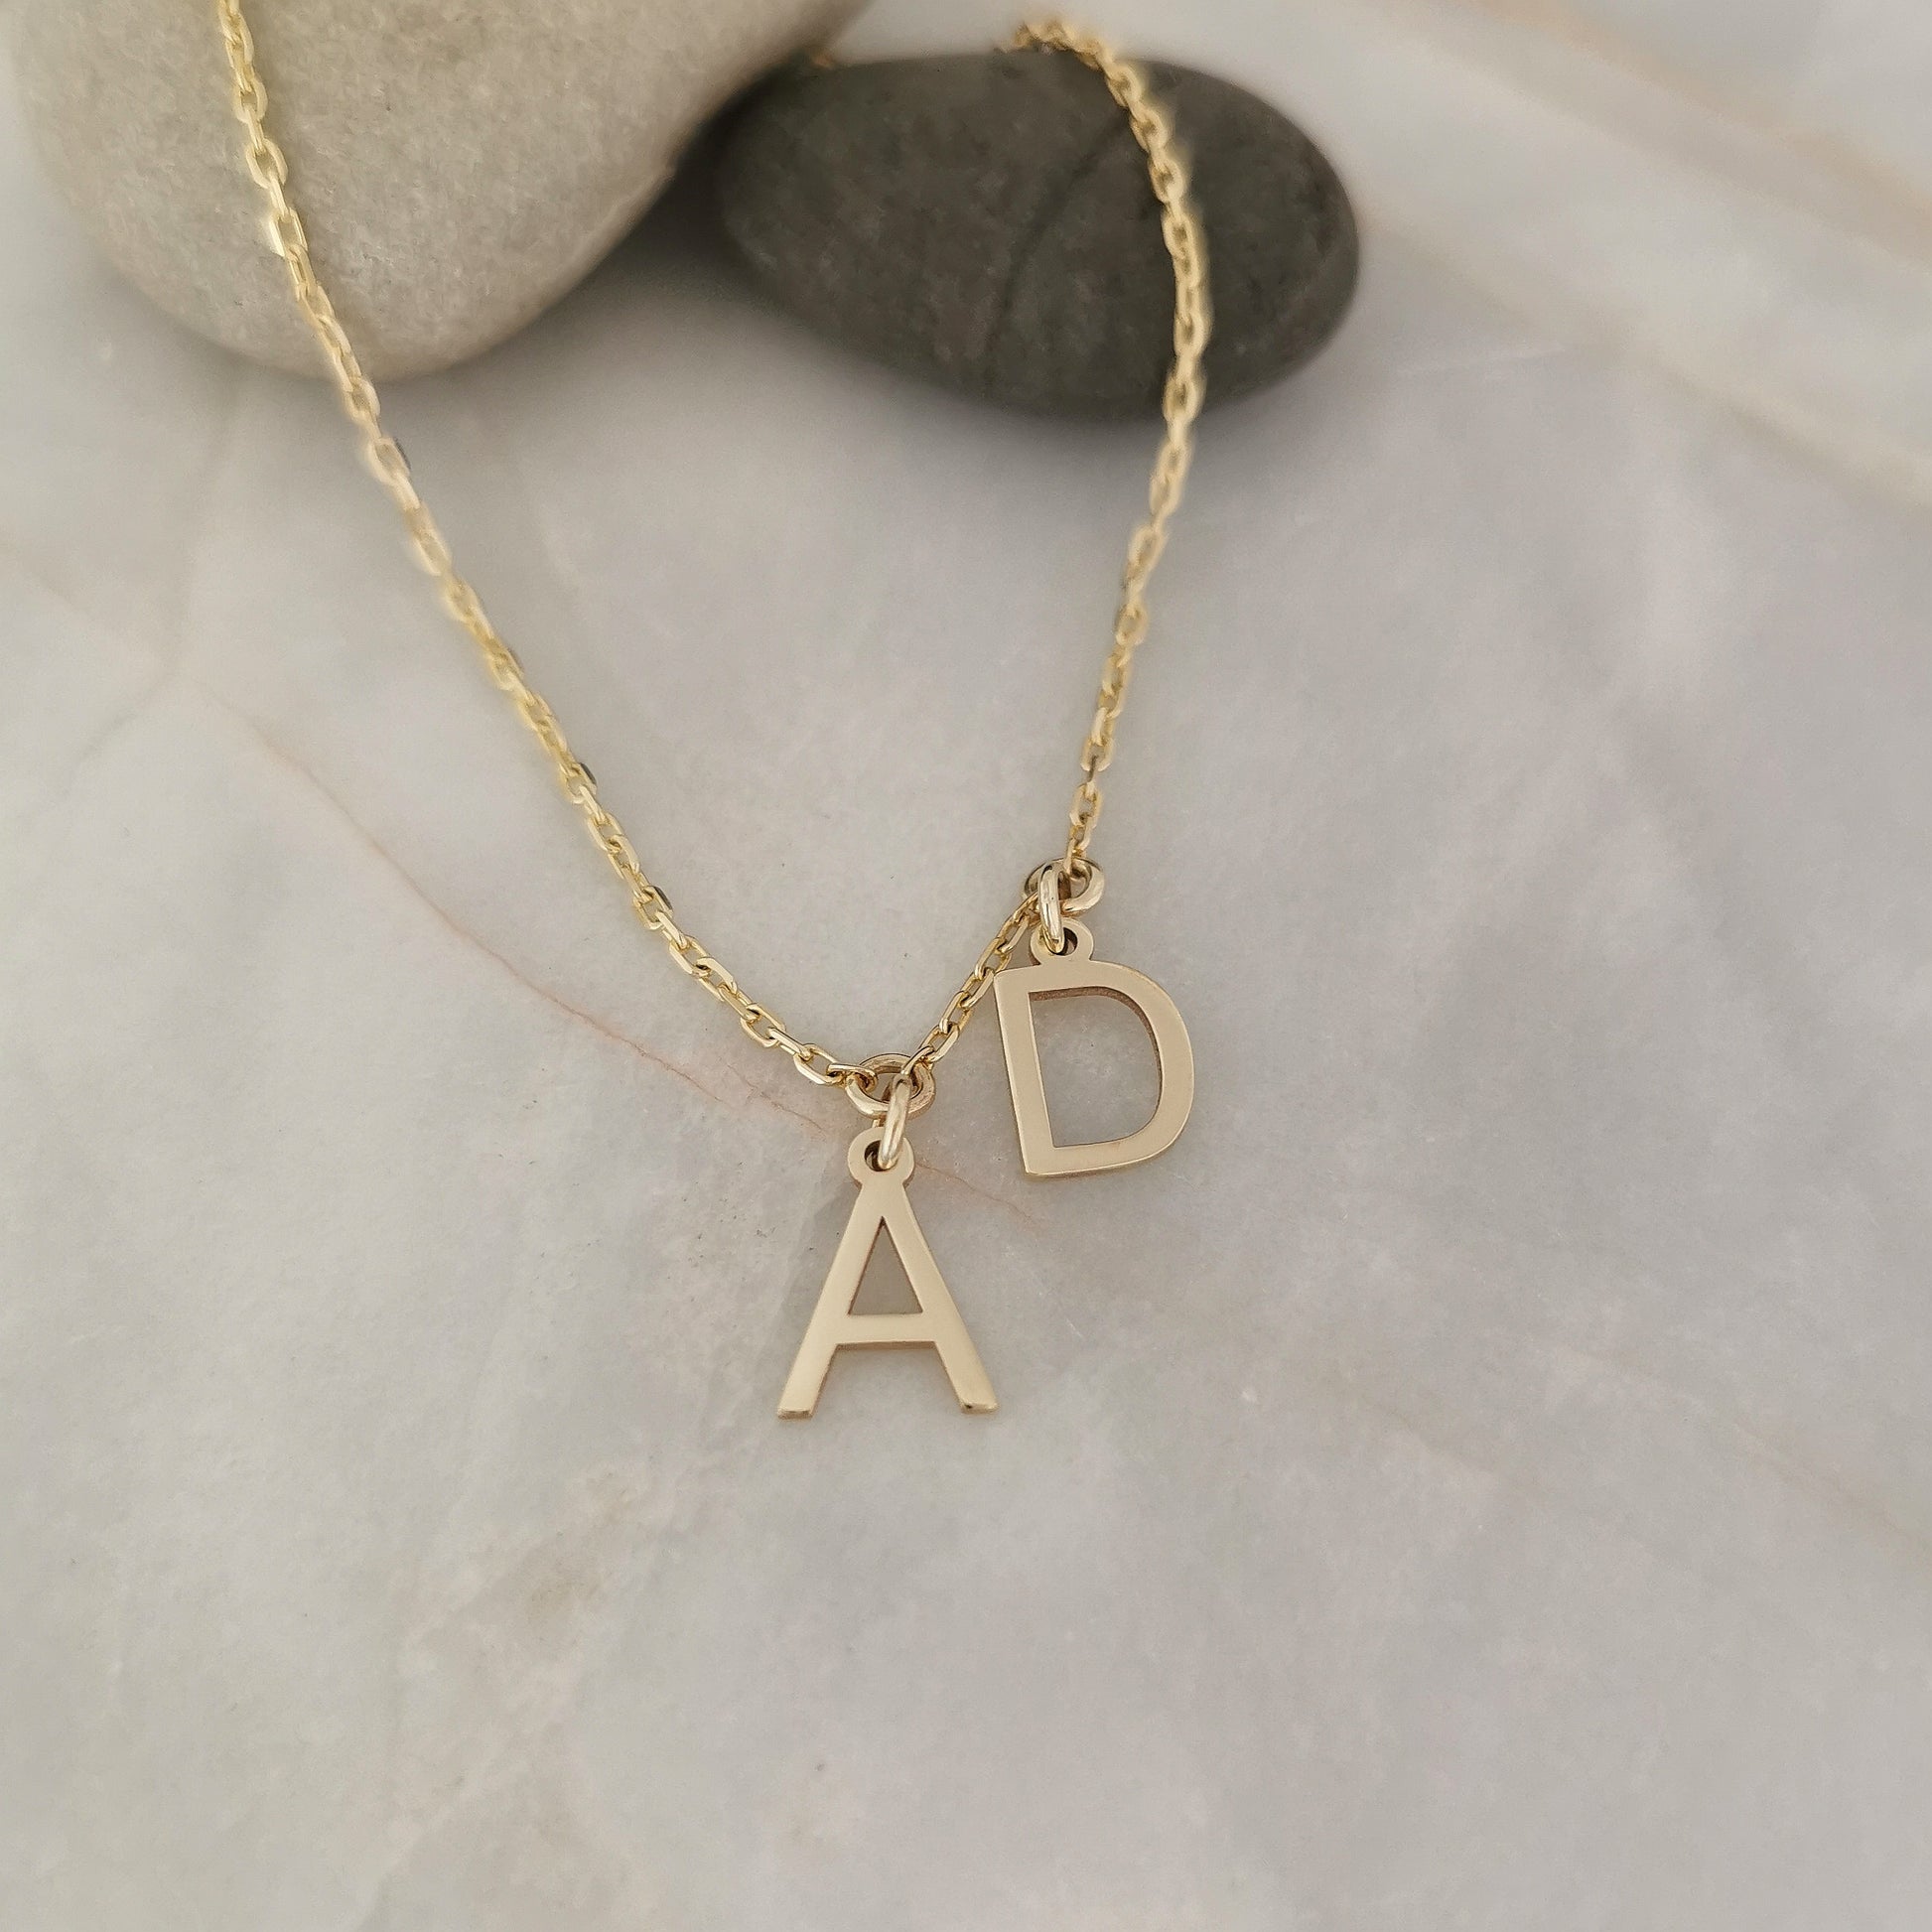 9ct Gold Initial Necklace with Two Initials Charms Attached